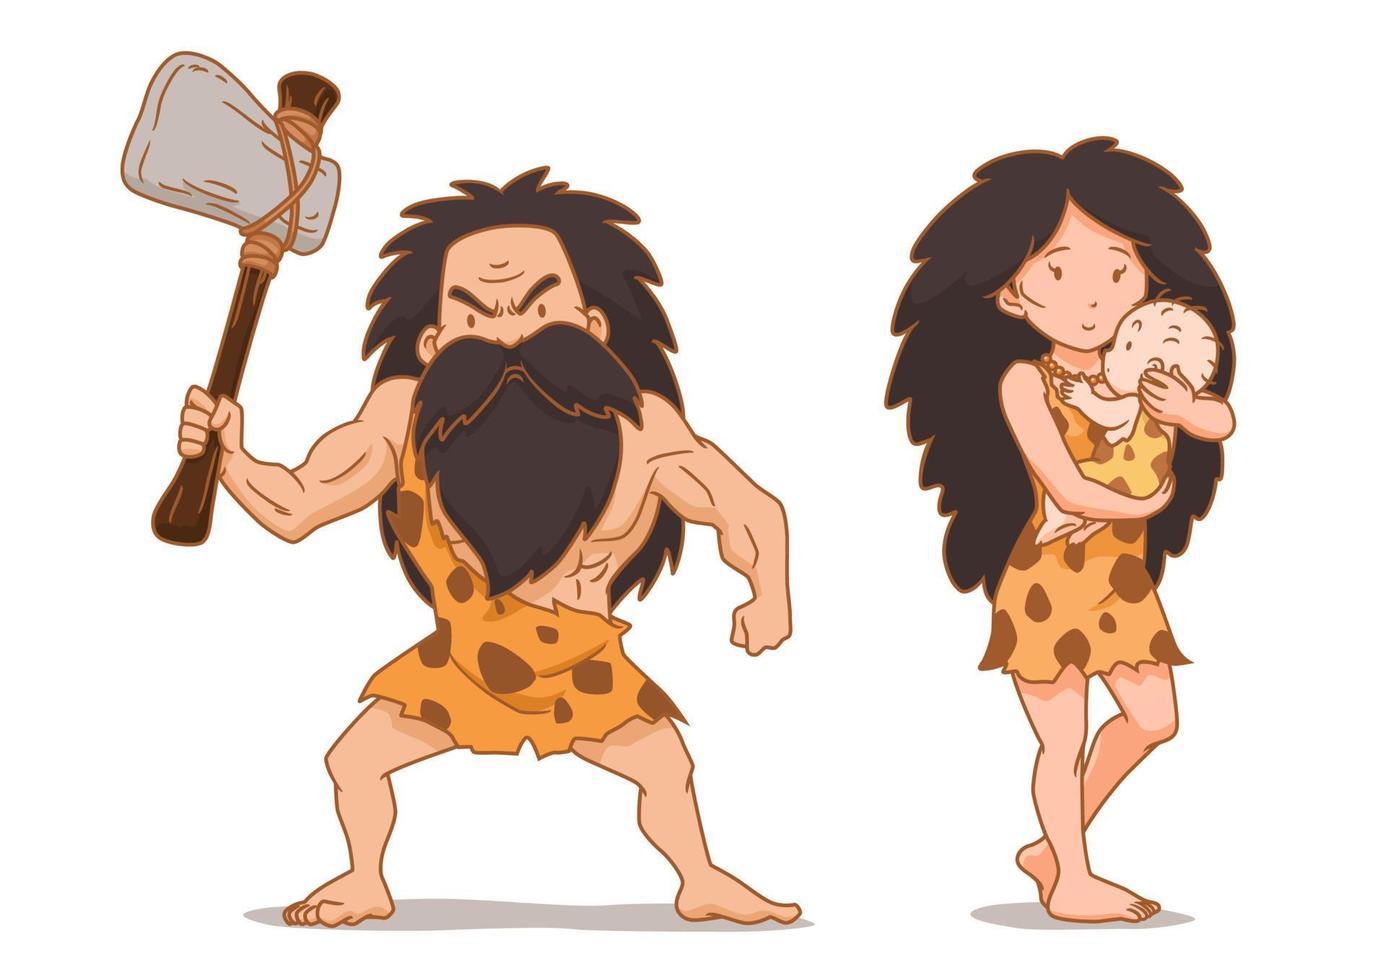 Cartoon character of caveman holding stone axe and cavewoman carrying baby. vector